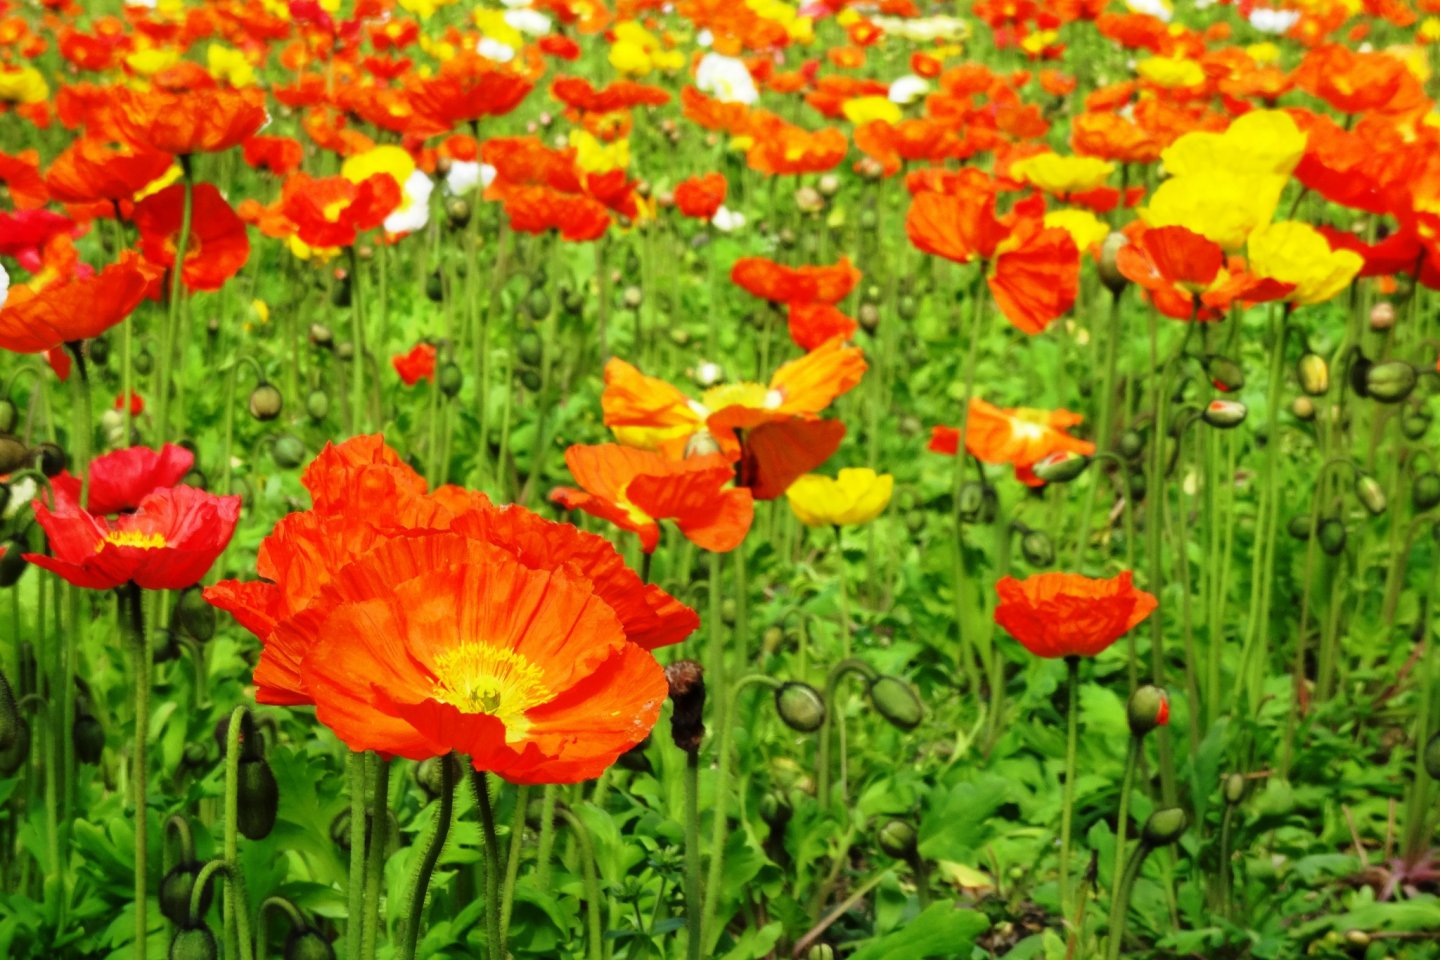 A field of poppies at the Flower Park Kagoshima